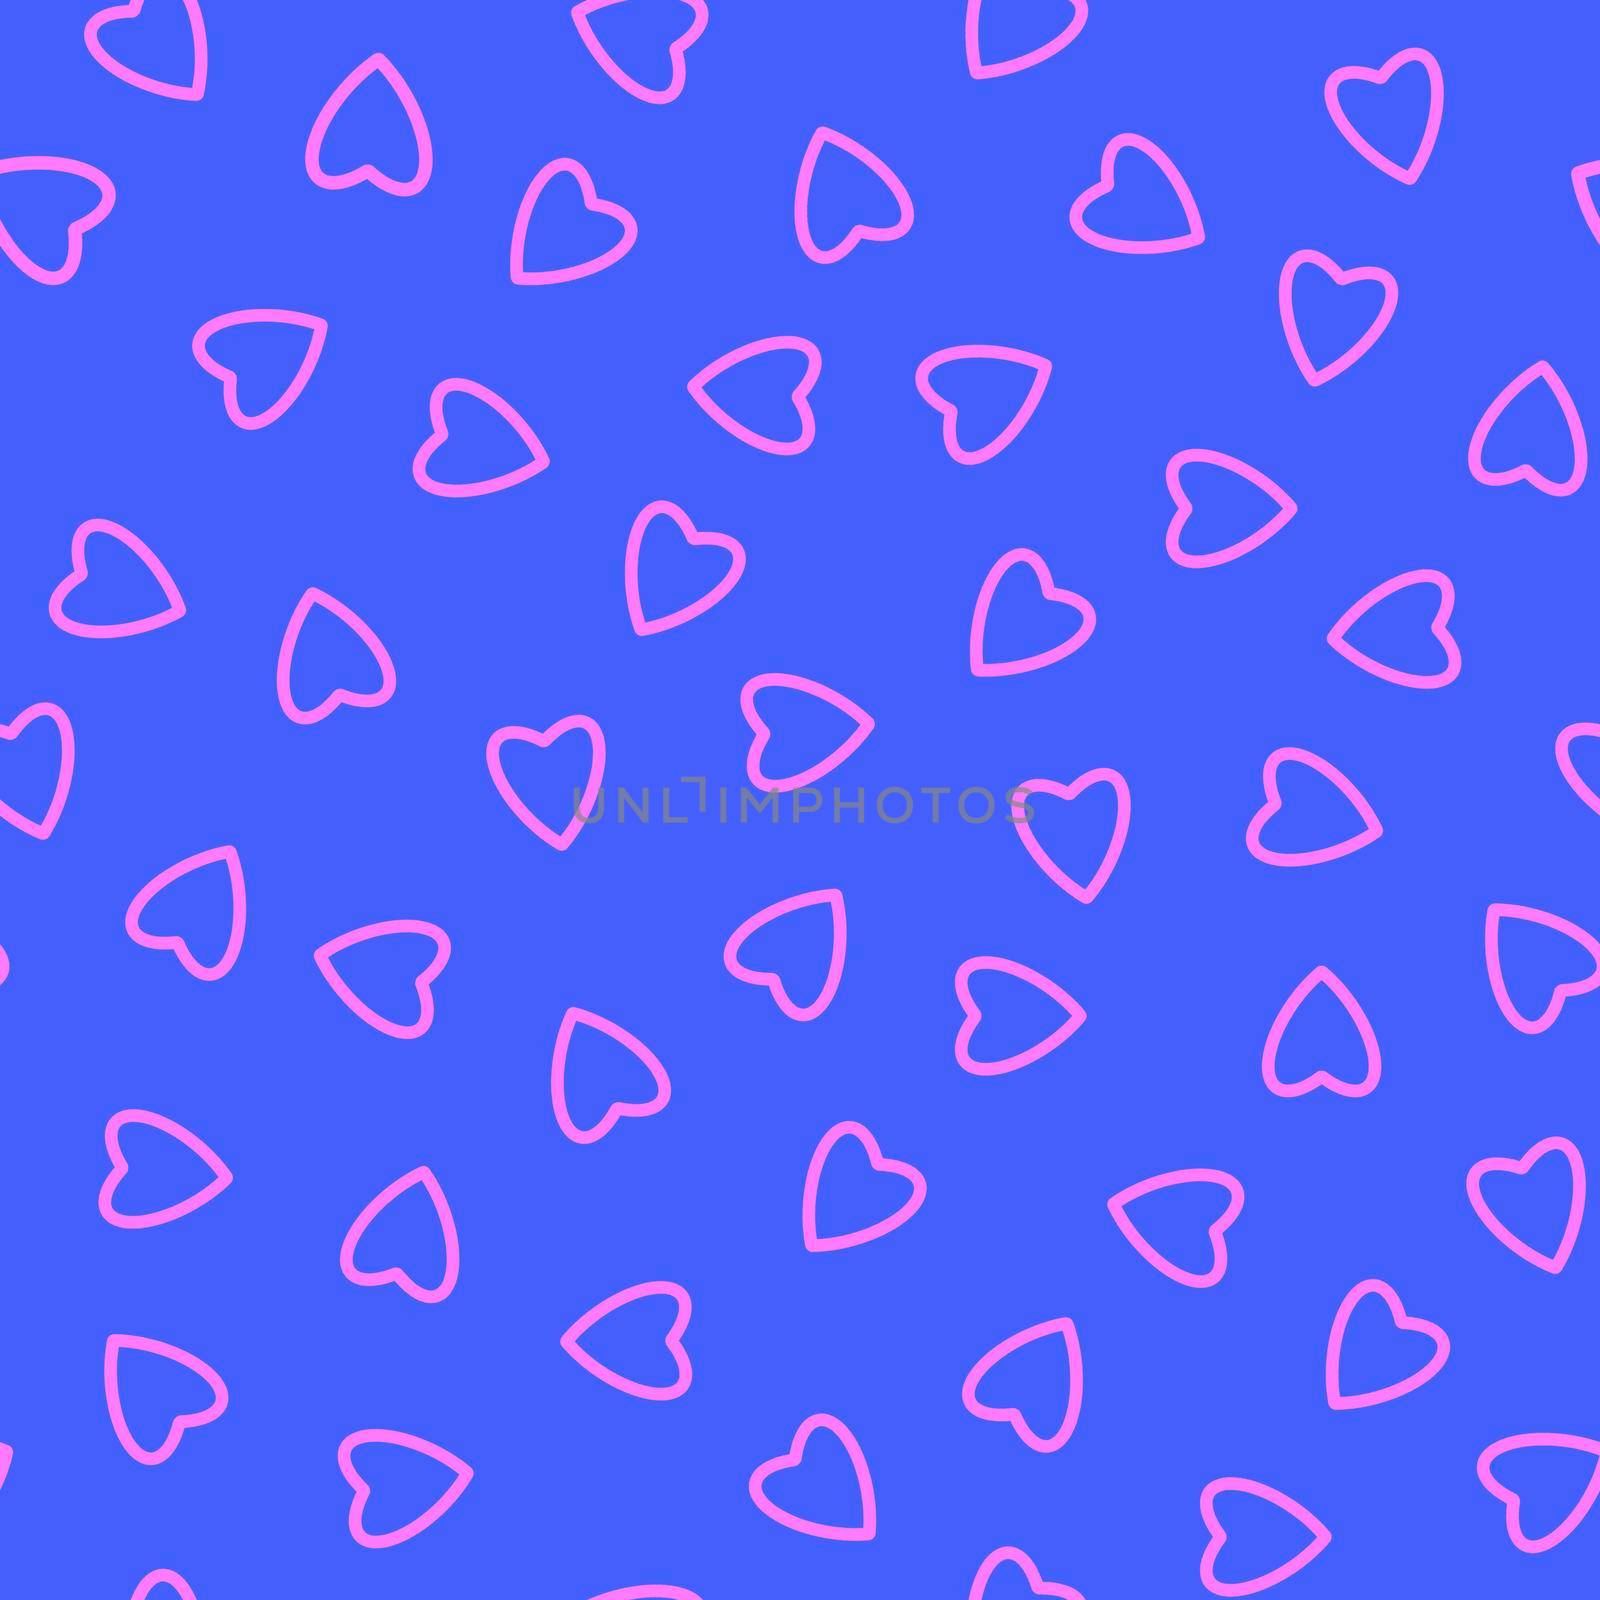 Simple hearts seamless pattern,endless chaotic texture made of tiny heart silhouettes.Valentines,mothers day background.Great for Easter,wedding,scrapbook,gift wrapping paper,textiles.Pink on blue.